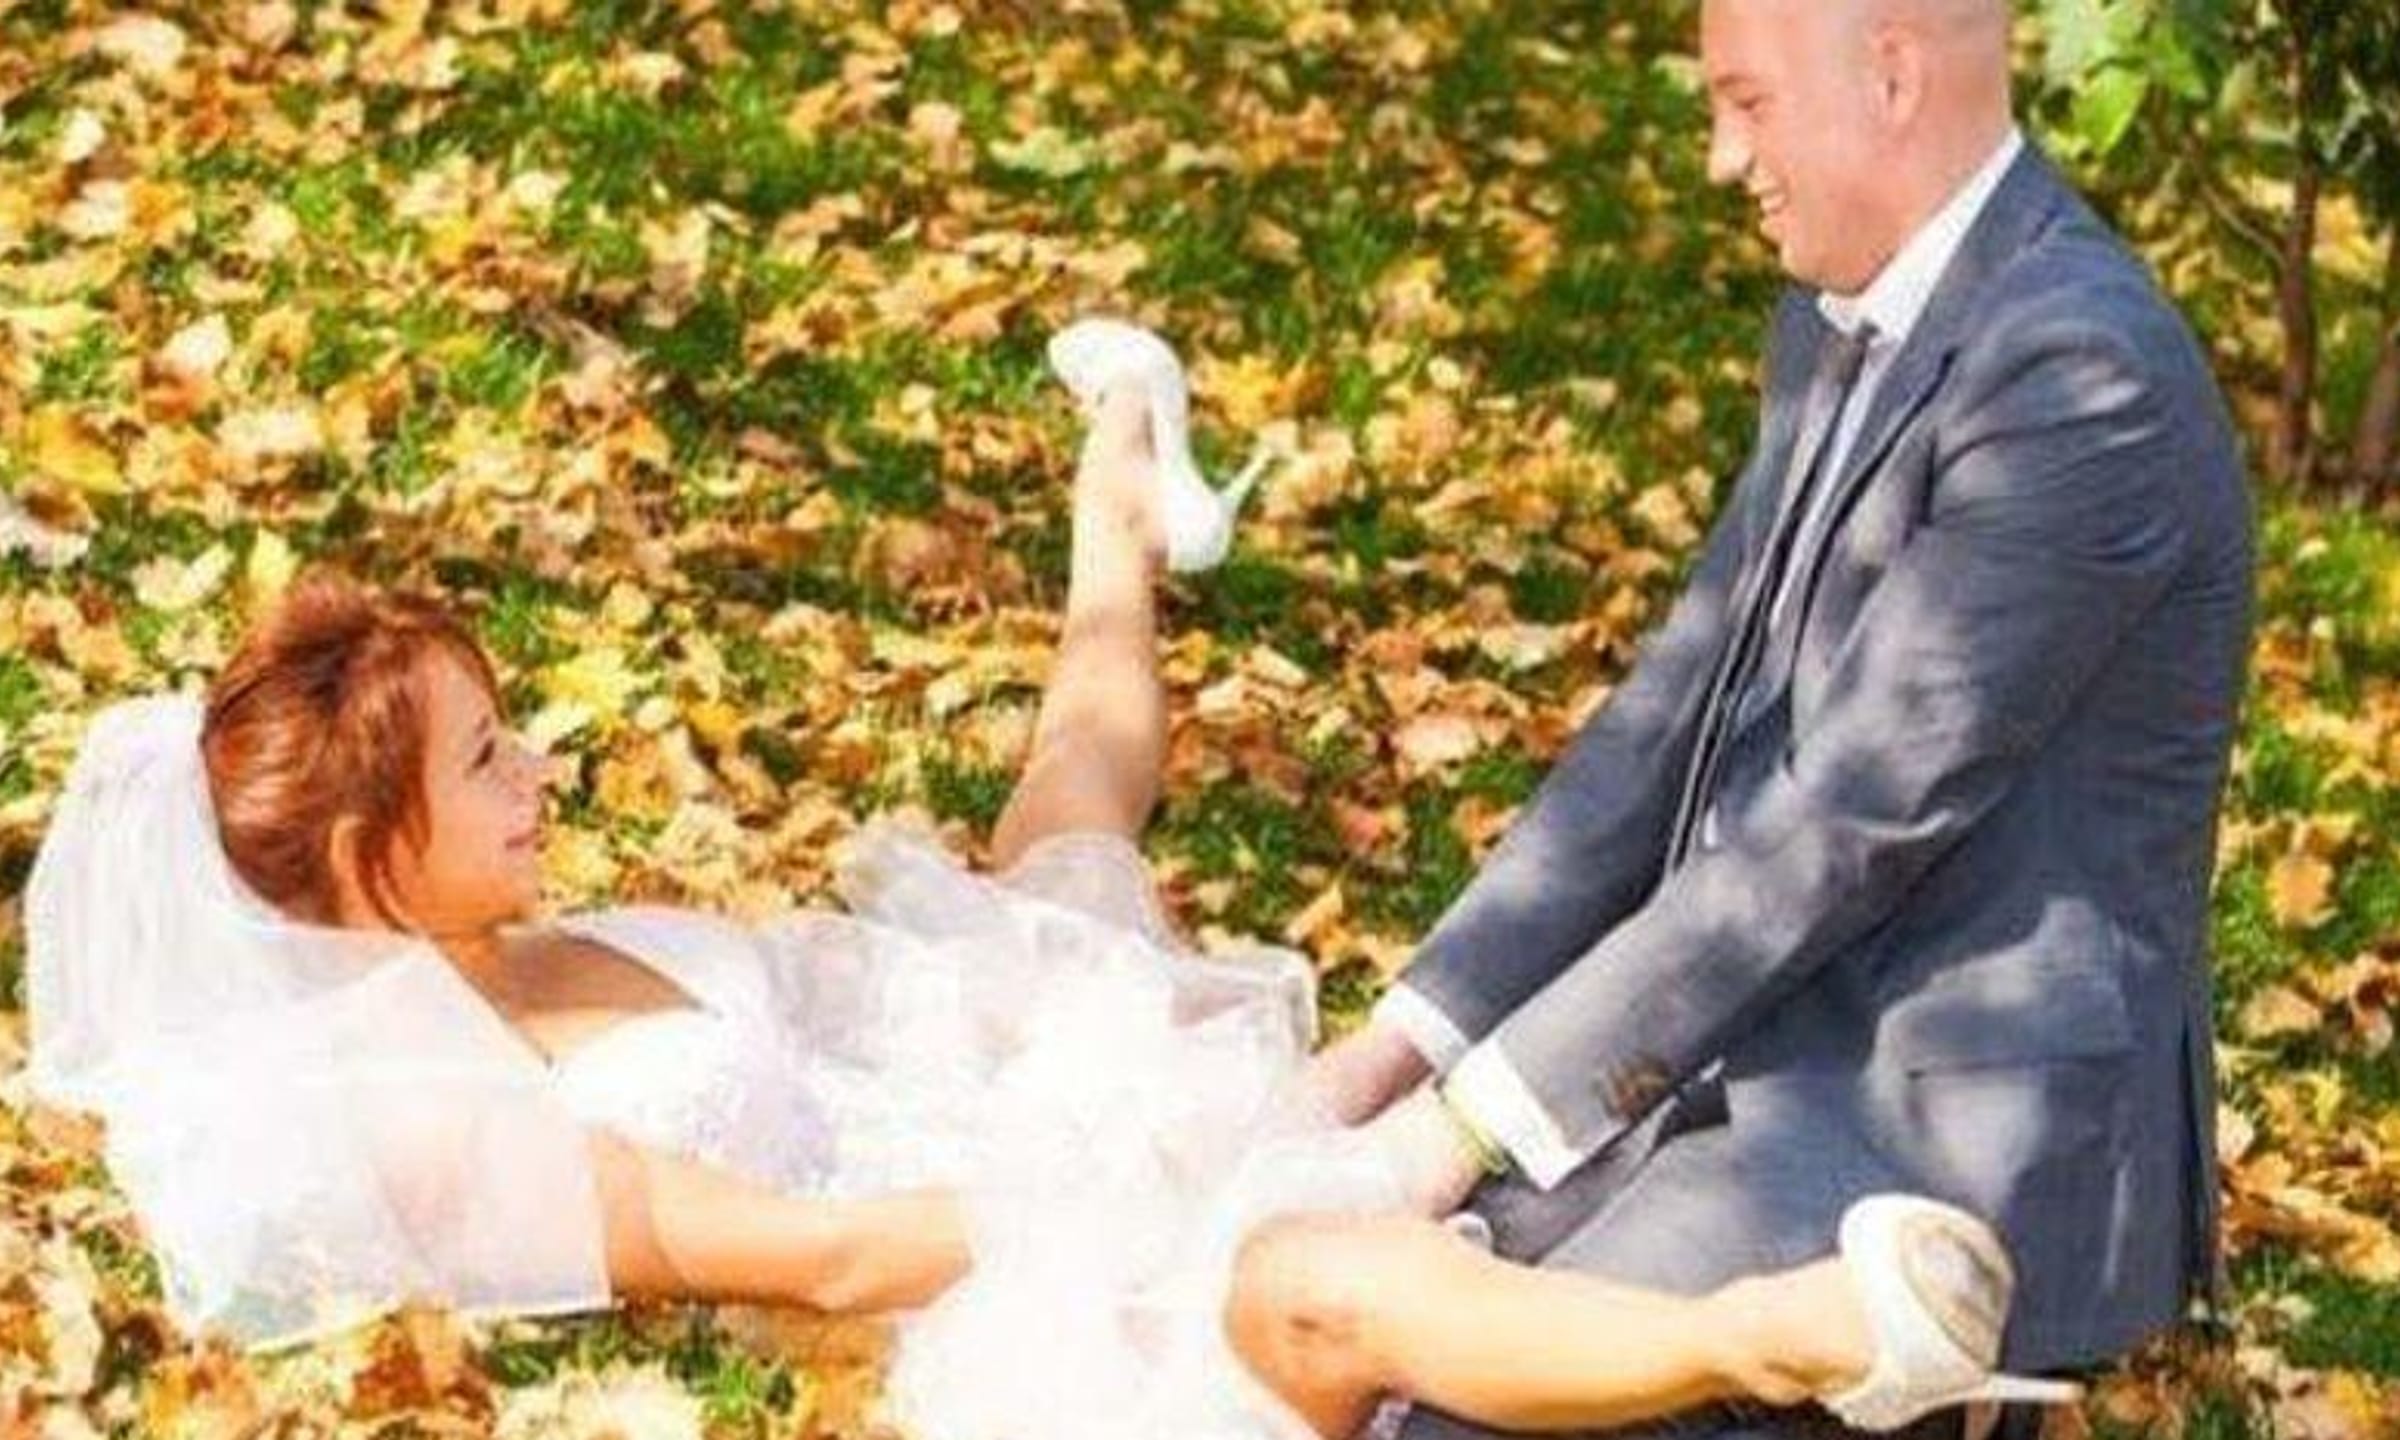 bj coy recommends nasty wedding pictures pic